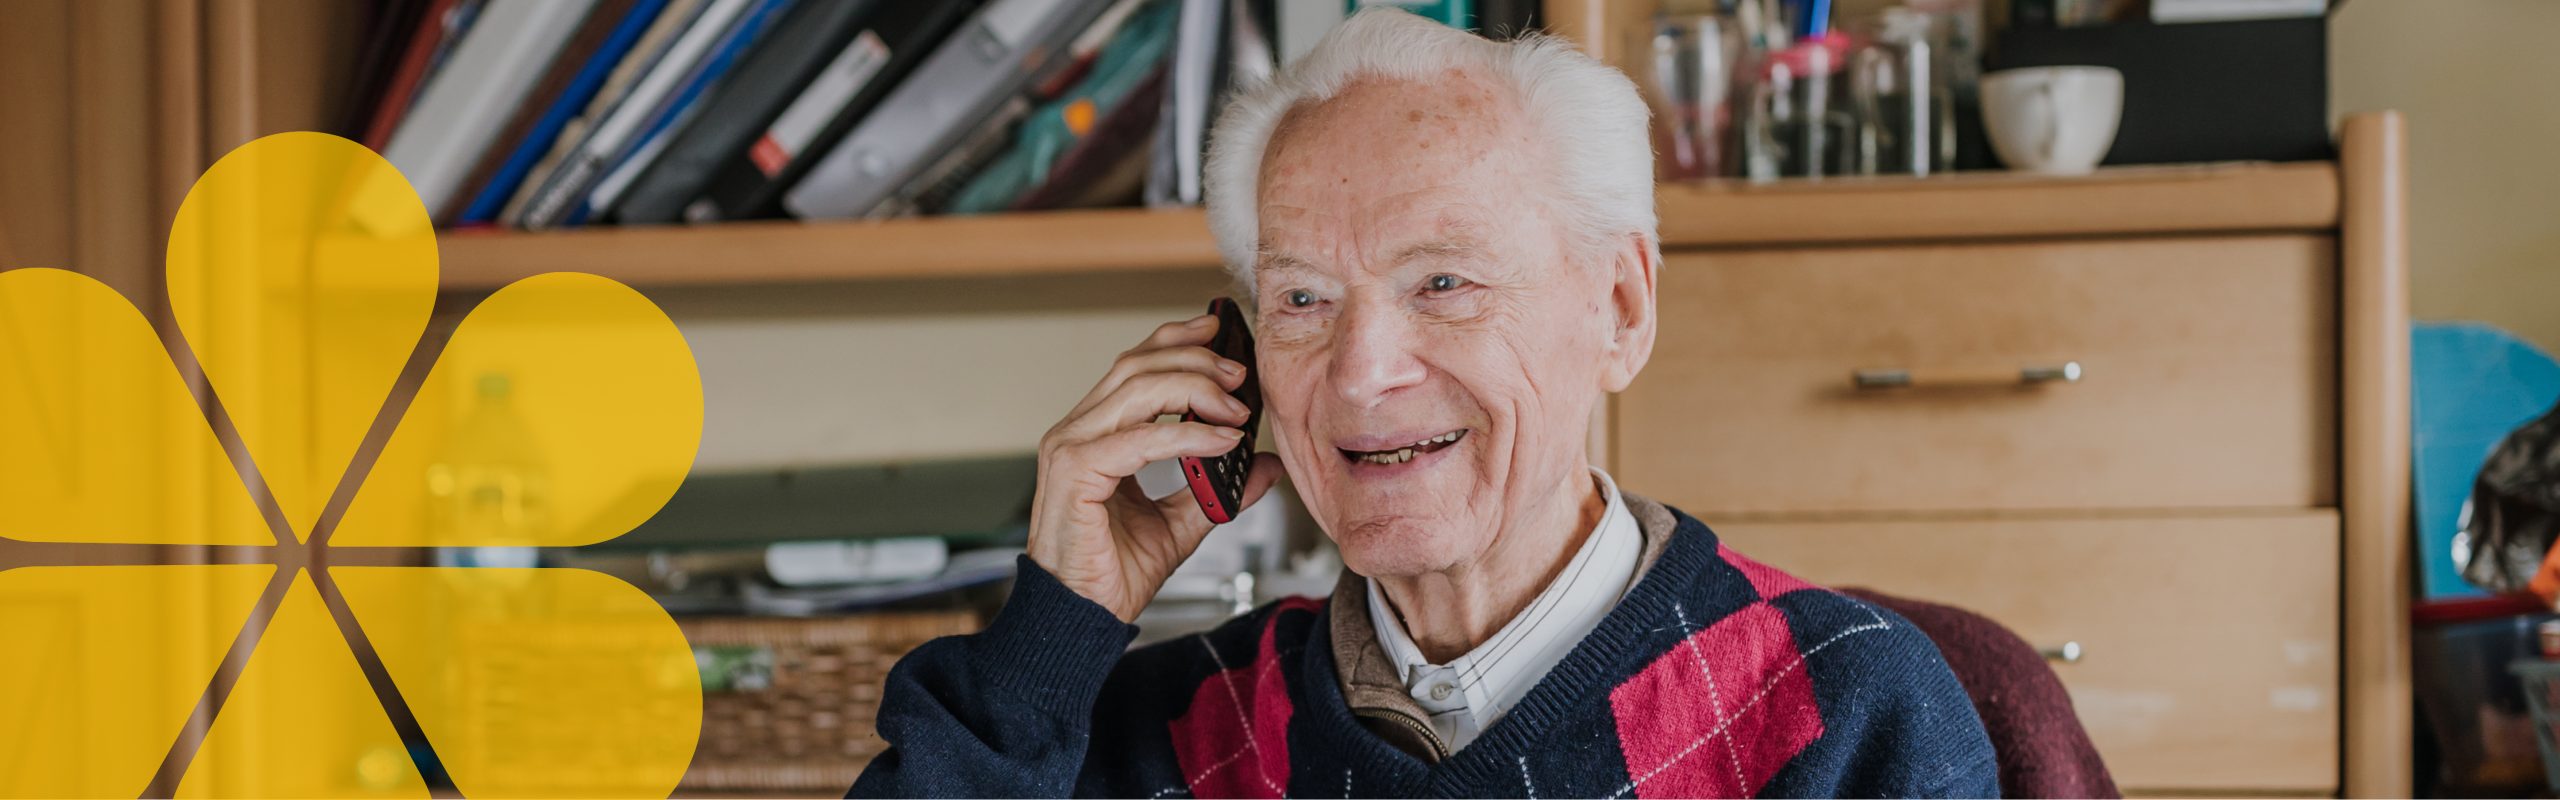 Older person talking on the phone and smiling